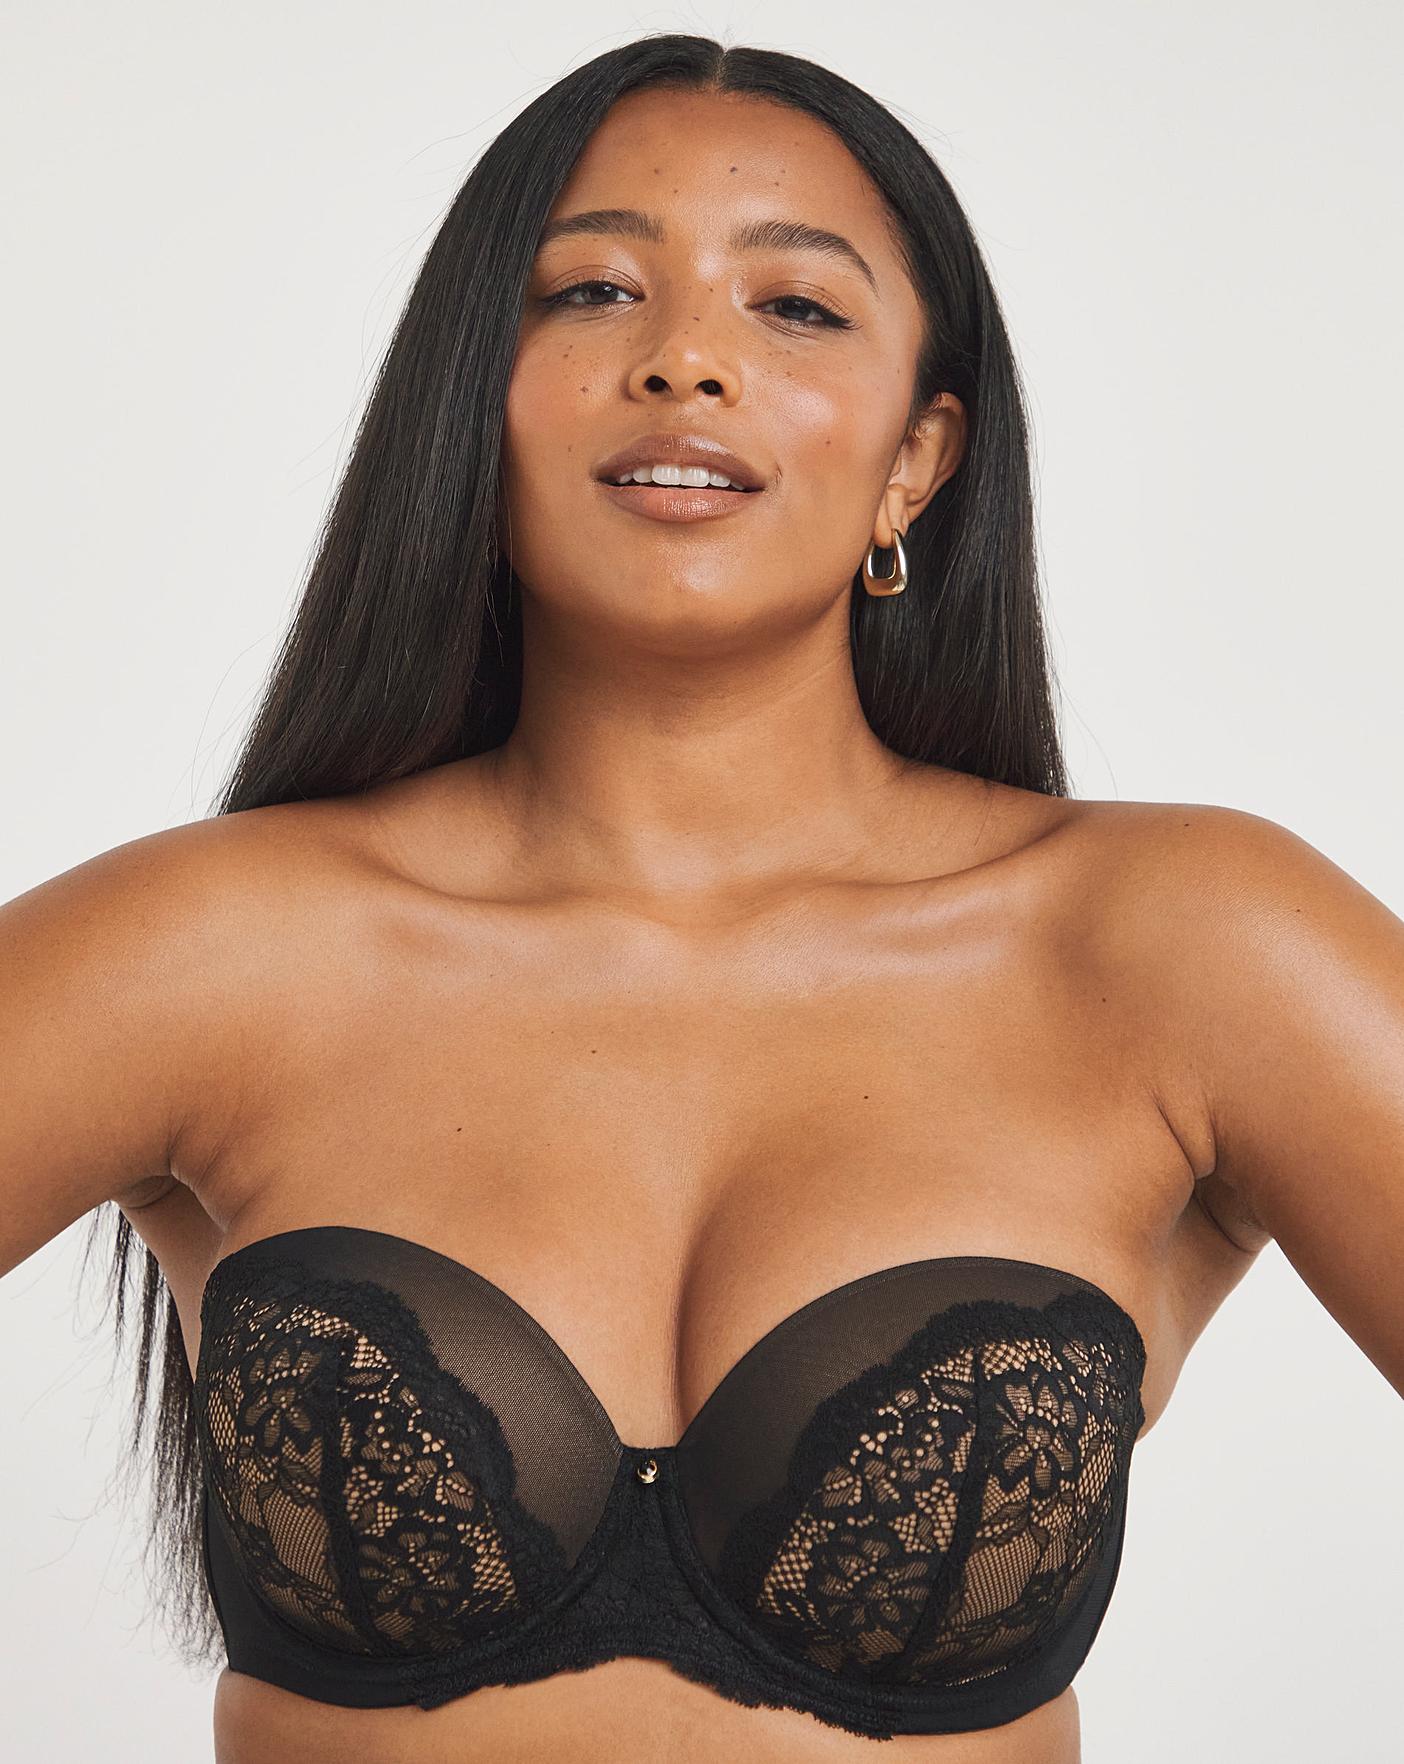 Ann Summers bra fitters reveal how to find the perfect size